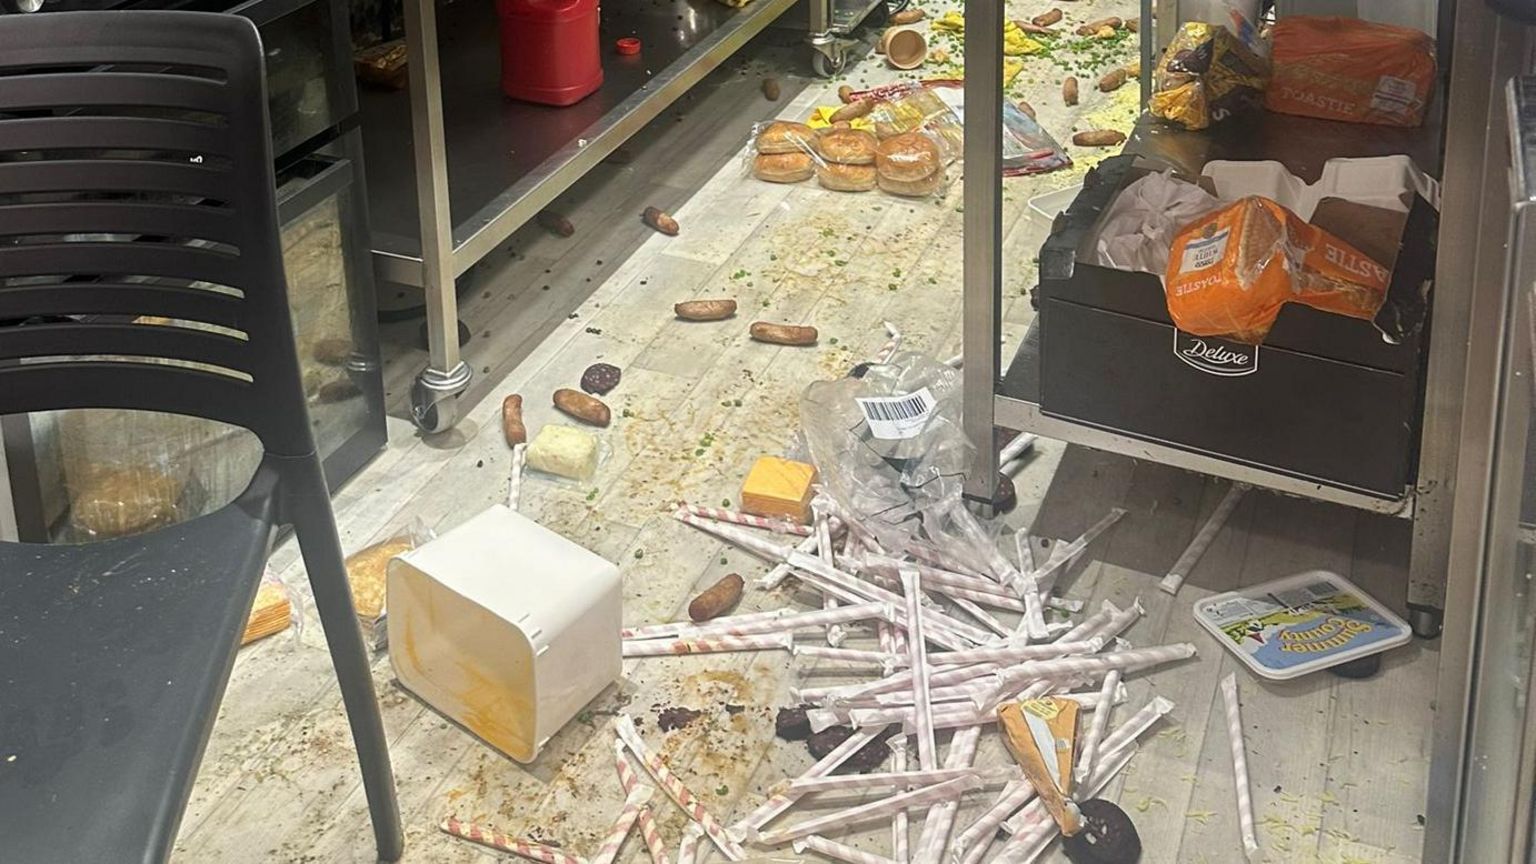 Food, drink and mess on the floor of the cafe kitchen